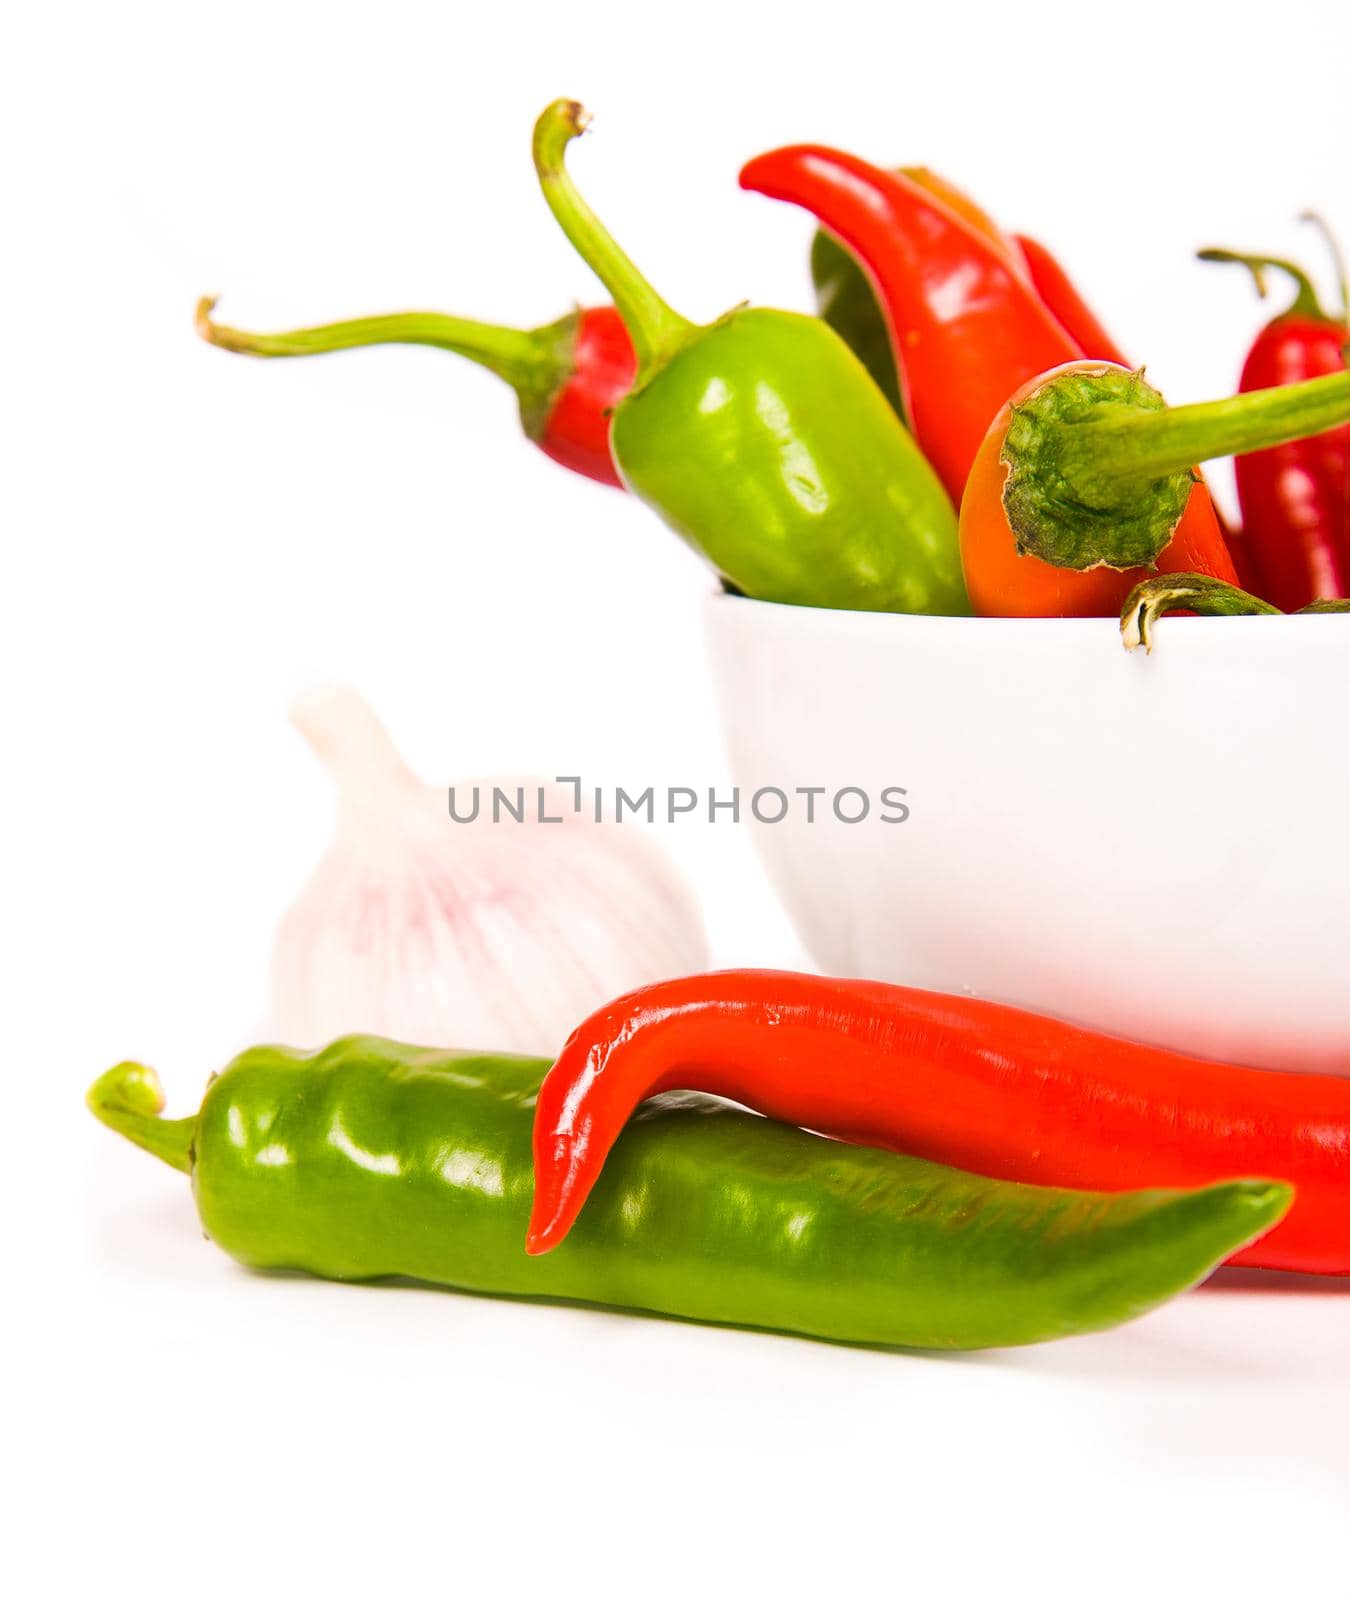 Red chili peppers over a white background